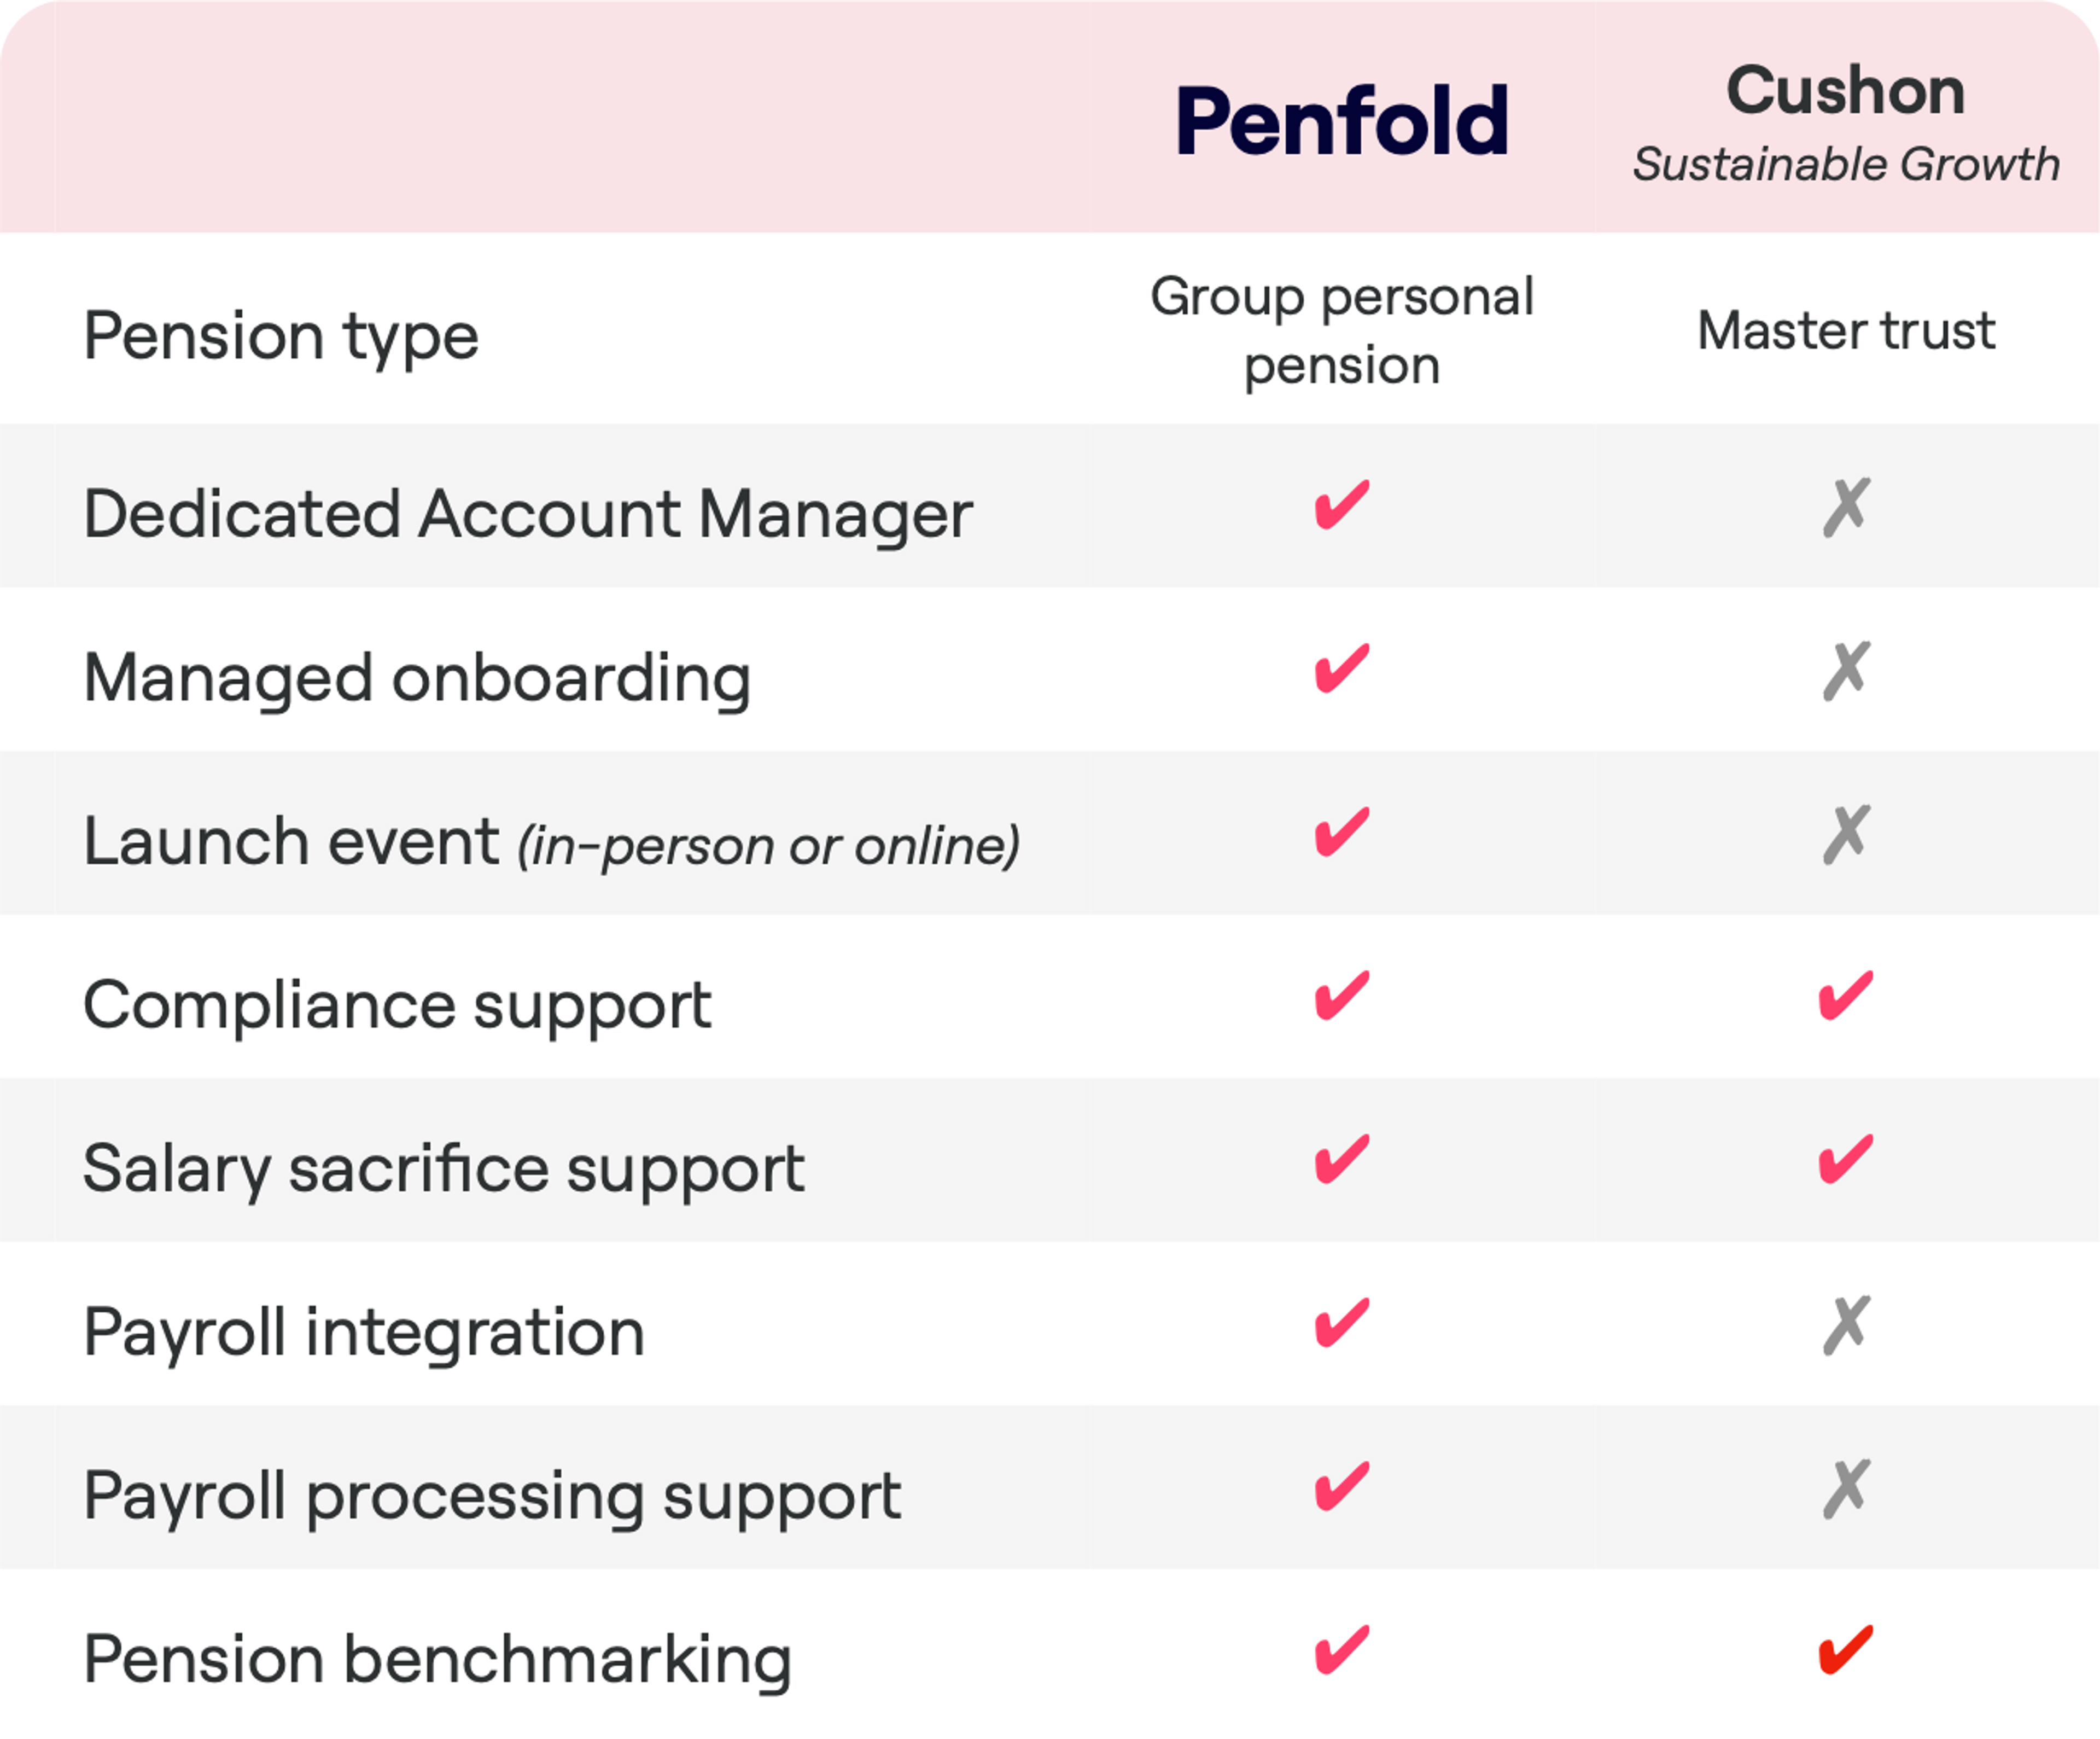 A comparison table between Penfold, a Group personal pension, and Cushon, labeled Sustainable Growth under Master trust. The services compared include Dedicated Account Manager, Managed onboarding, Launch event, Compliance support, Salary sacrifice support, Payroll integration, Payroll processing support, and Pension benchmarking. Penfold offers all eight service listed, while Cushon offers only Compliance support and Salary sacrifice support.